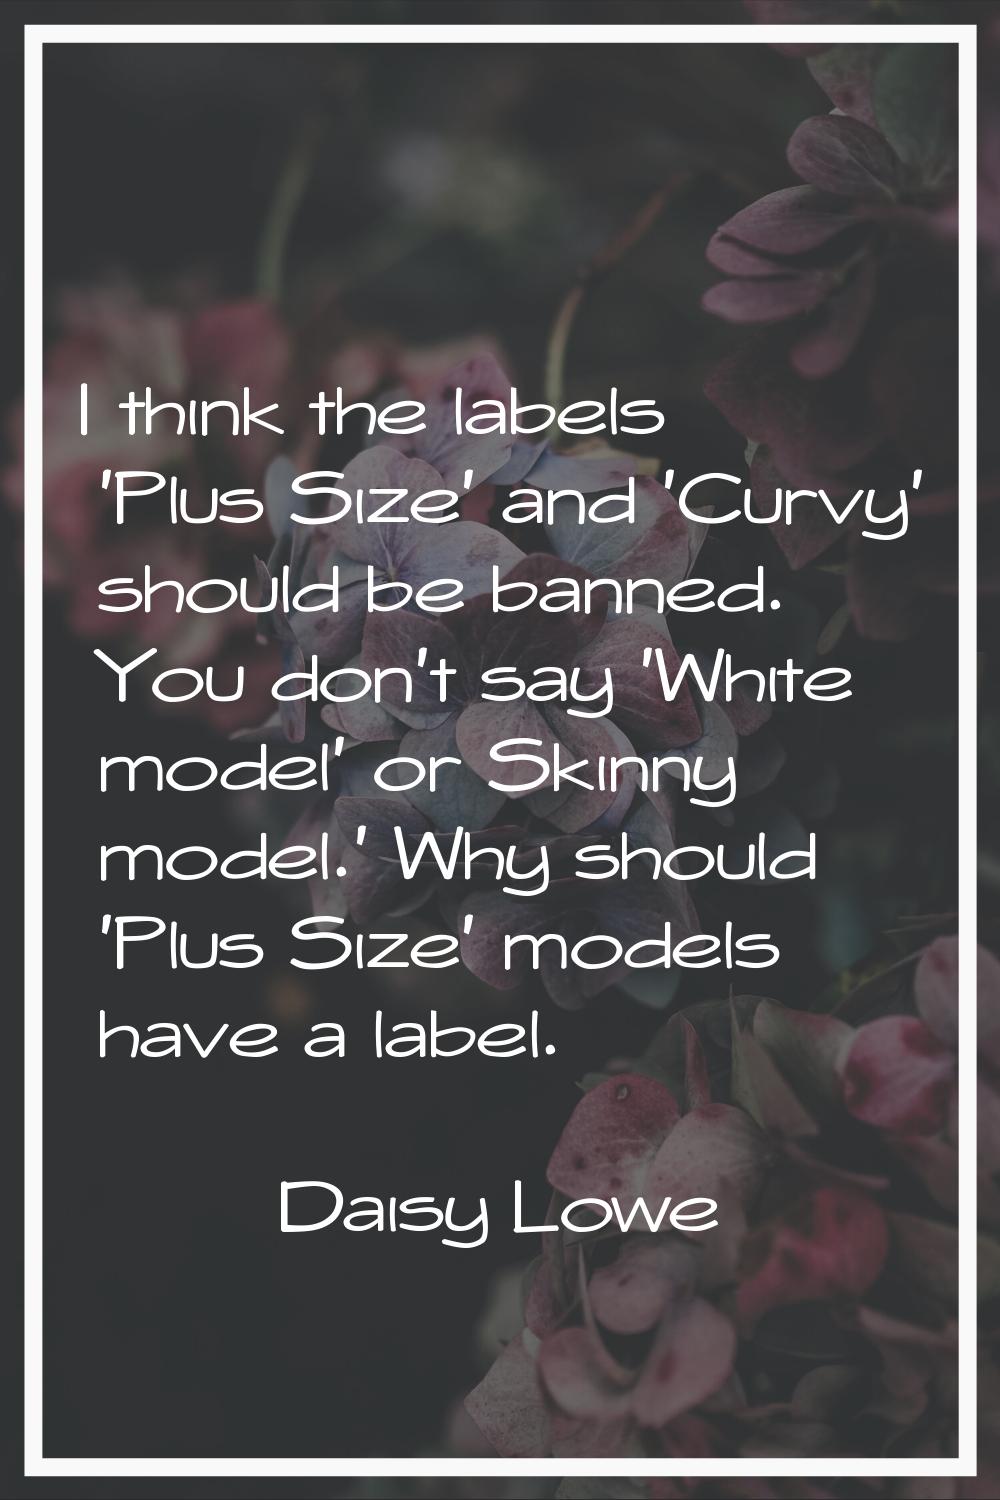 I think the labels 'Plus Size' and 'Curvy' should be banned. You don't say 'White model' or Skinny 